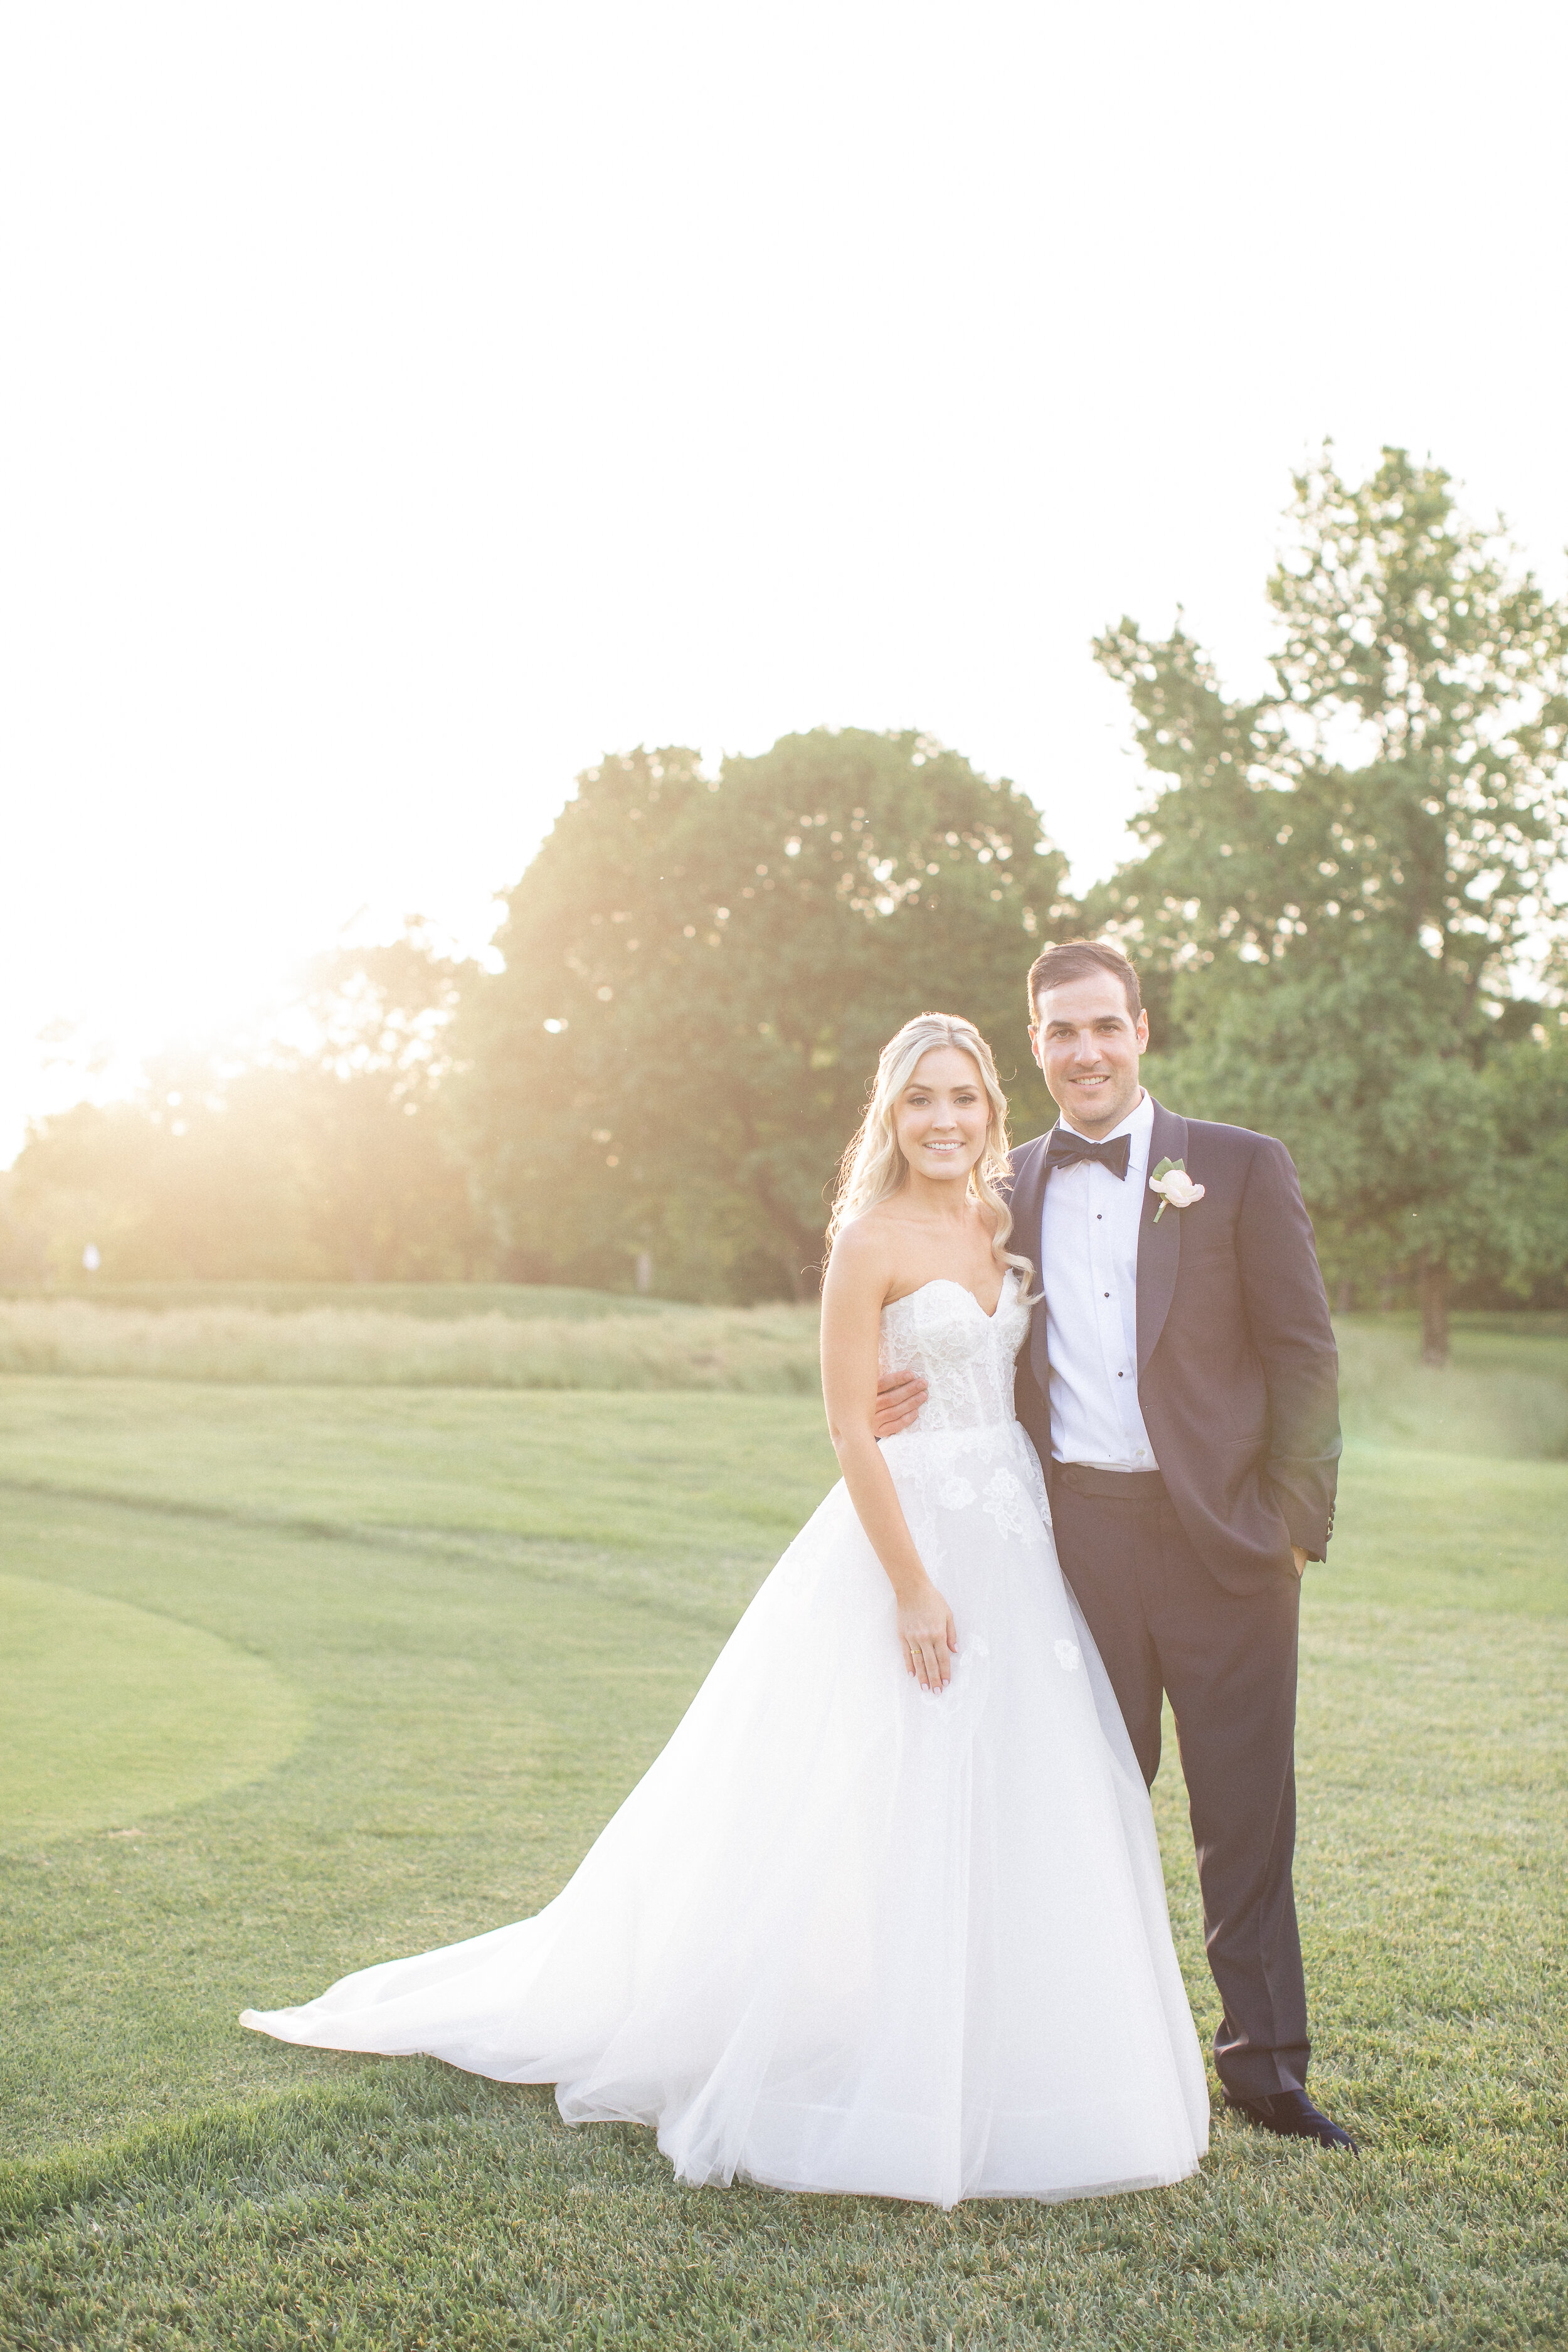 Elyse + Michael at The Greenwich Country Club | Style Me Pretty